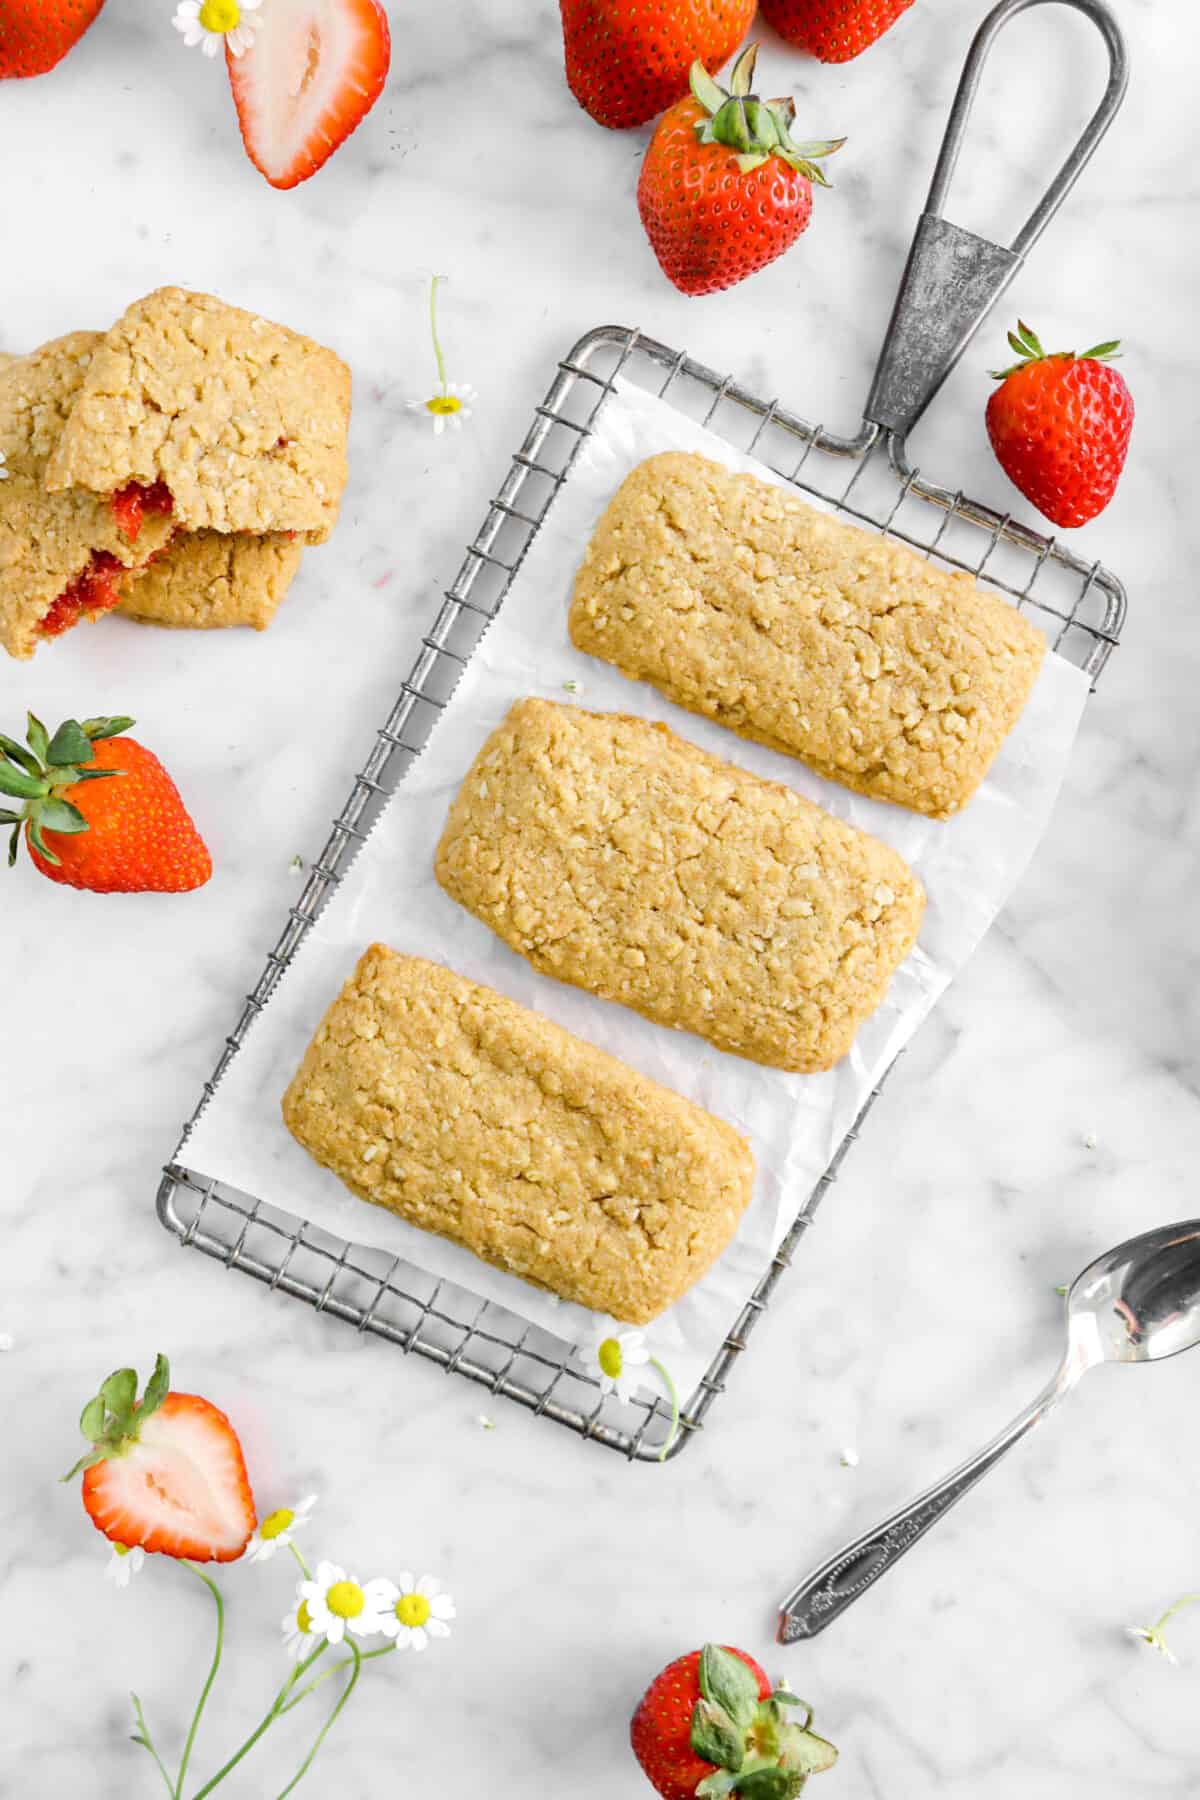 three nutri grain bars on wire cooling rack with strawberries, a spoon, chamomile flowers, and more nutri grain bars around